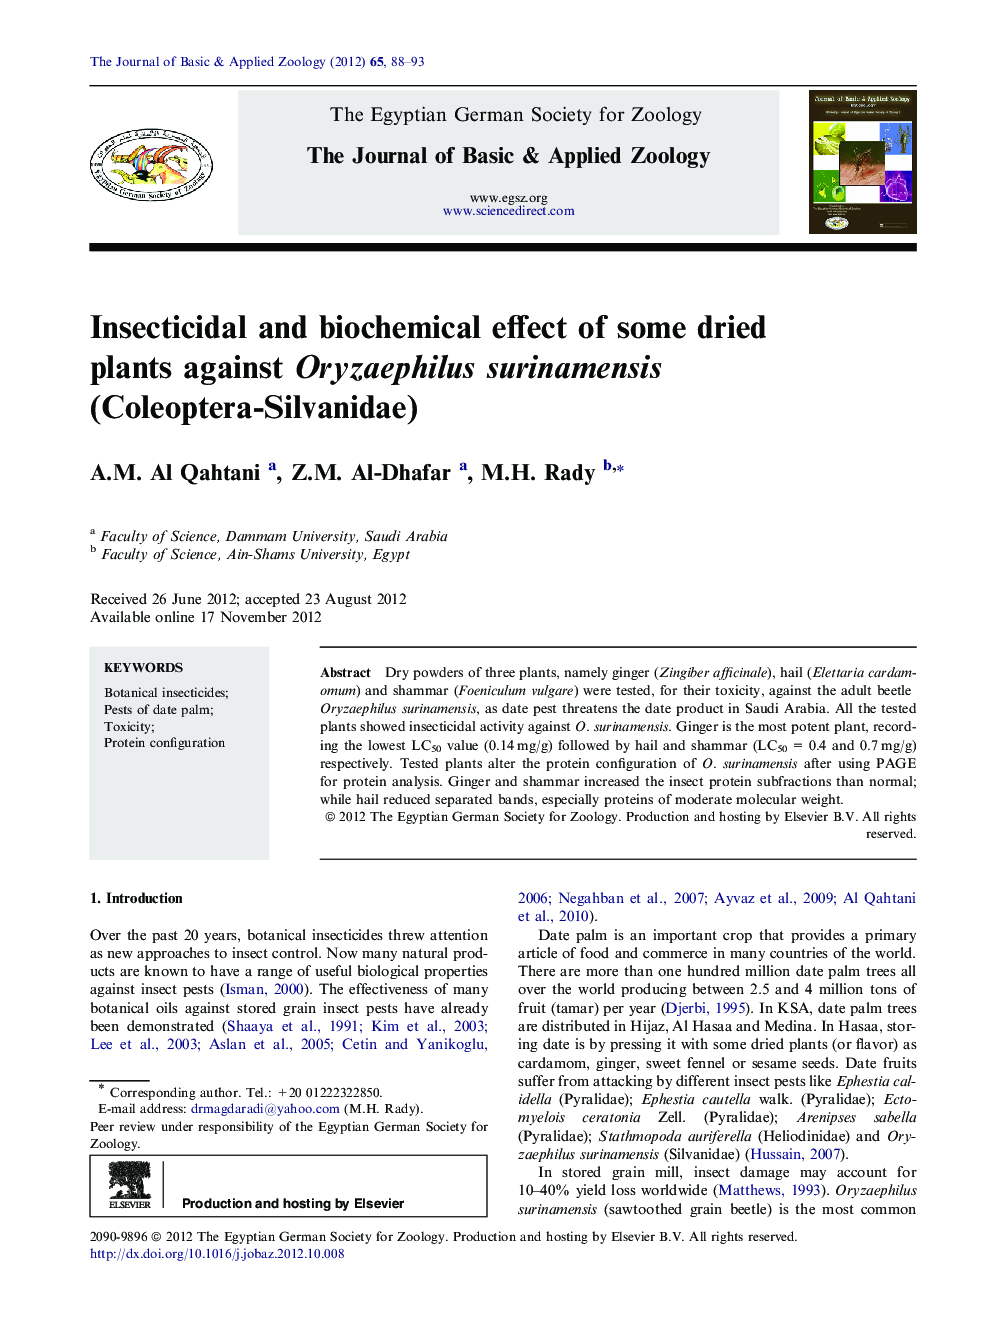 Insecticidal and biochemical effect of some dried plants against Oryzaephilus surinamensis (Coleoptera-Silvanidae) 